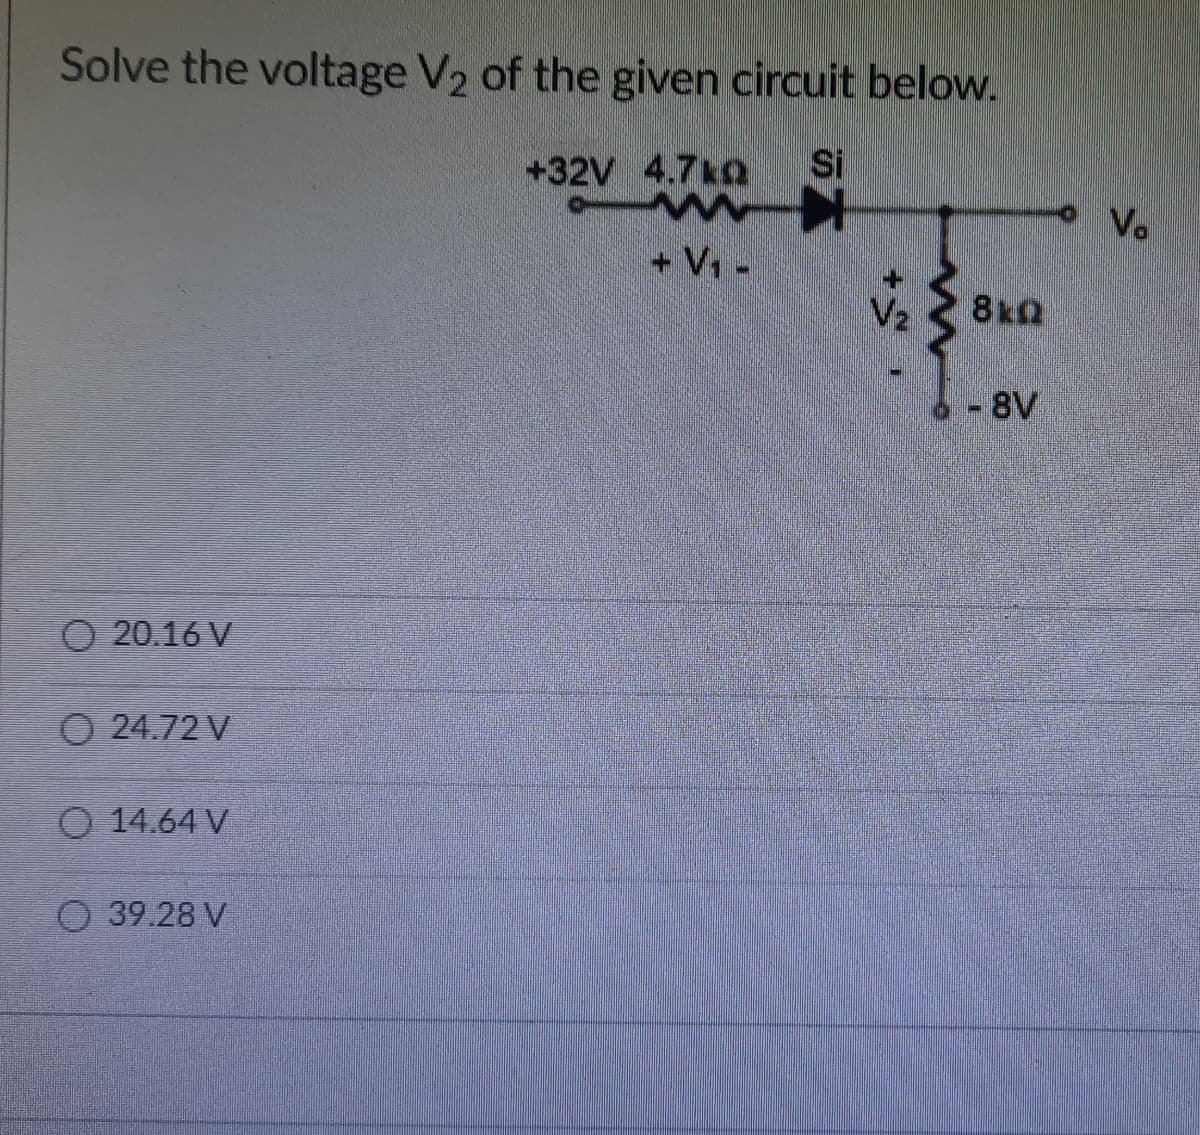 Solve the voltage V2 of the given circuit below.
+32V 4.7kQ
Si
Vo
+ V -
V2
8kQ
- 8V
O 20.16 V
O 24.72 V
O 14.64 V
O 39.28 V
